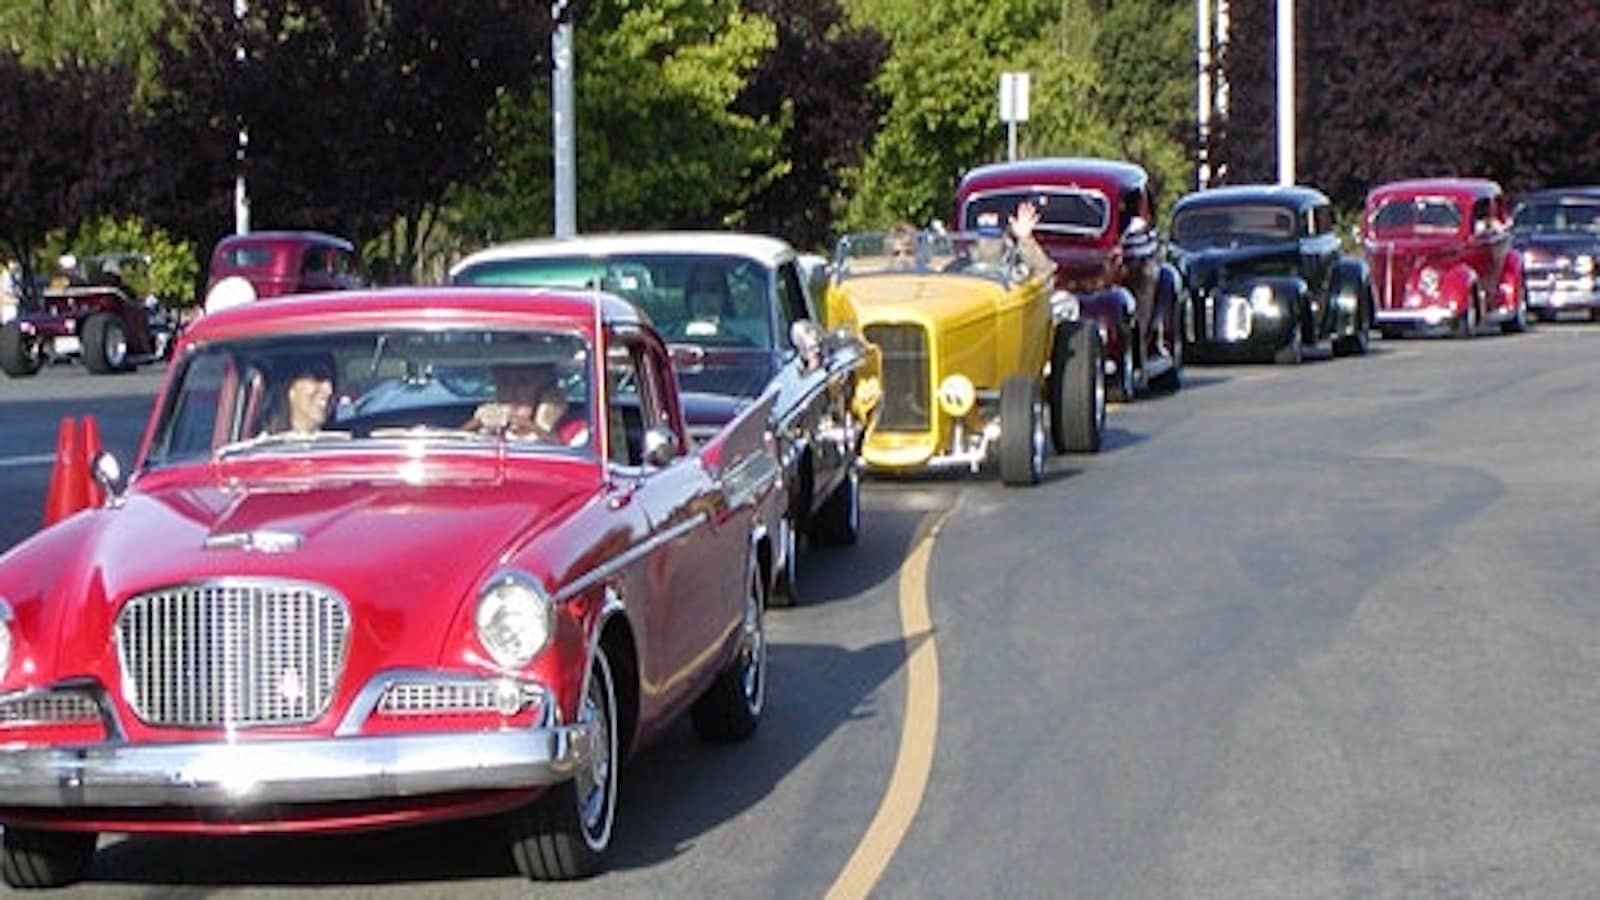 redwood city car show_sf bay area things to do_800x450